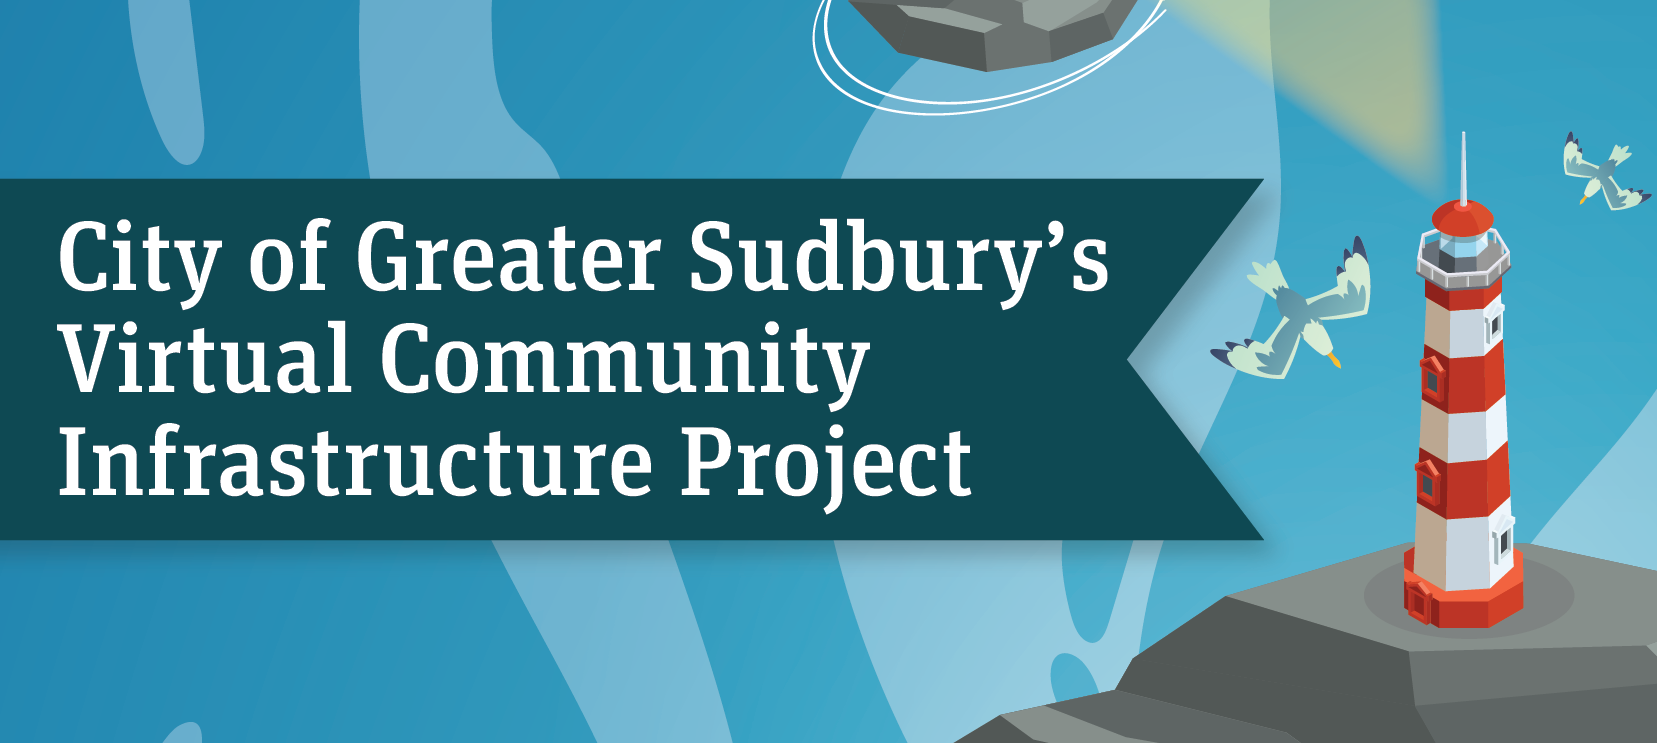 City of Greater Sudbury’s Virtual Community Infrastructure Project